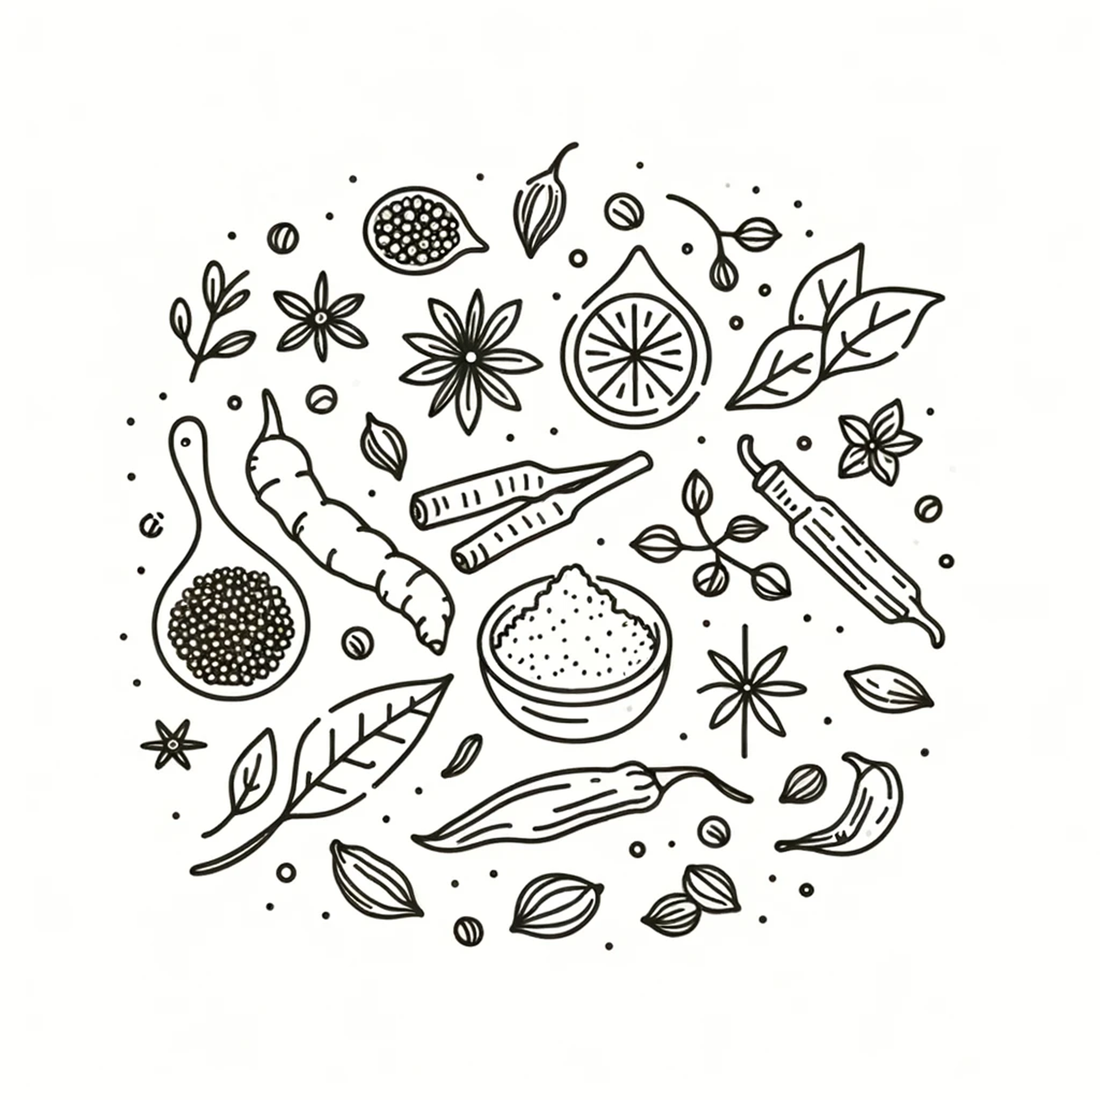 Black and white line drawing of different spices, chillies, and decorative spots/stars.  